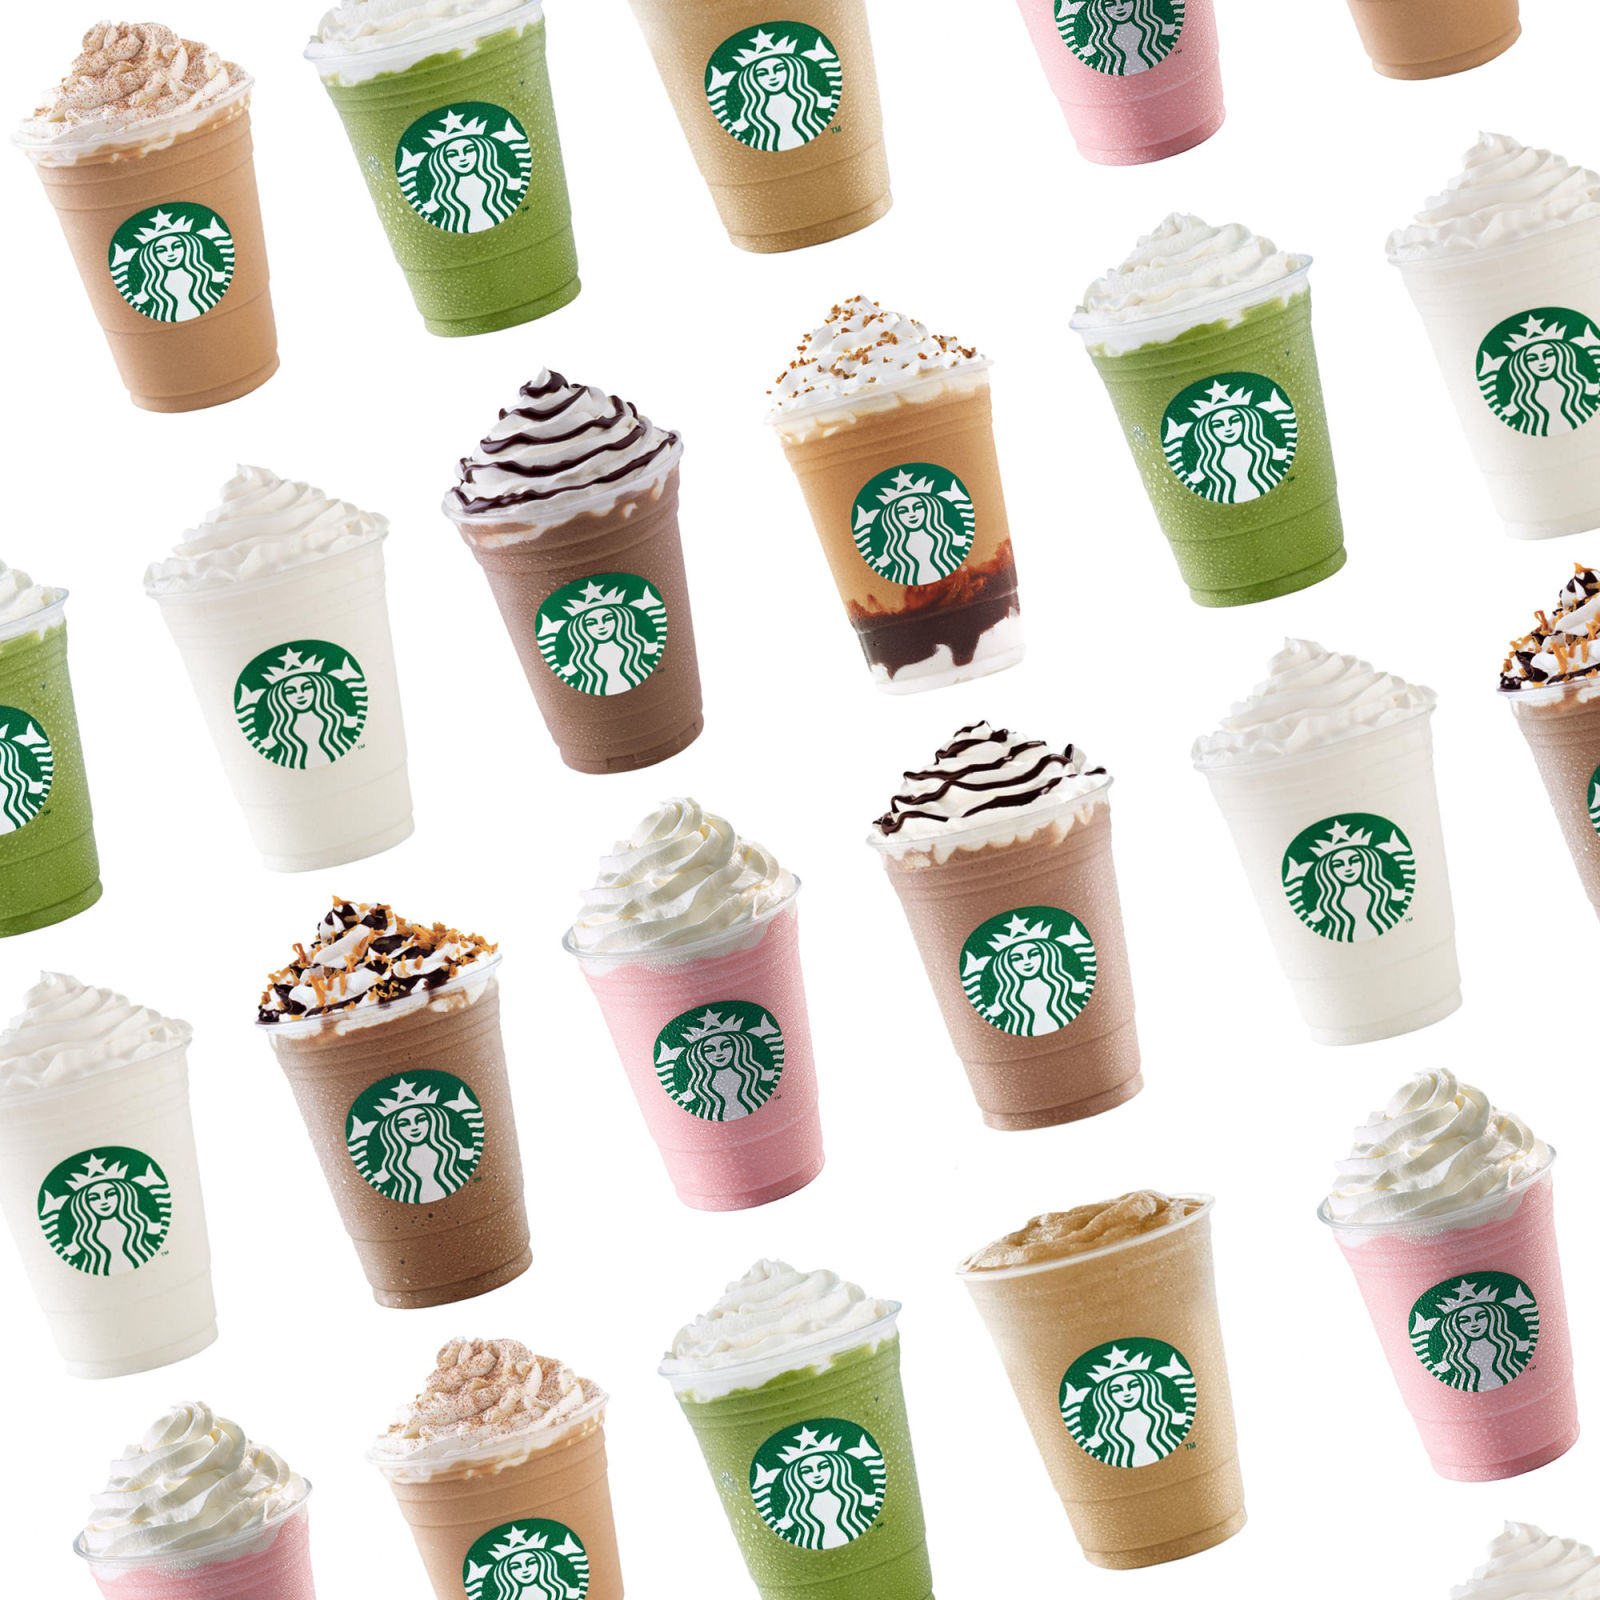 Starbucks Drink Names and Pictures: A Visual Guide to Your Favorite Brews